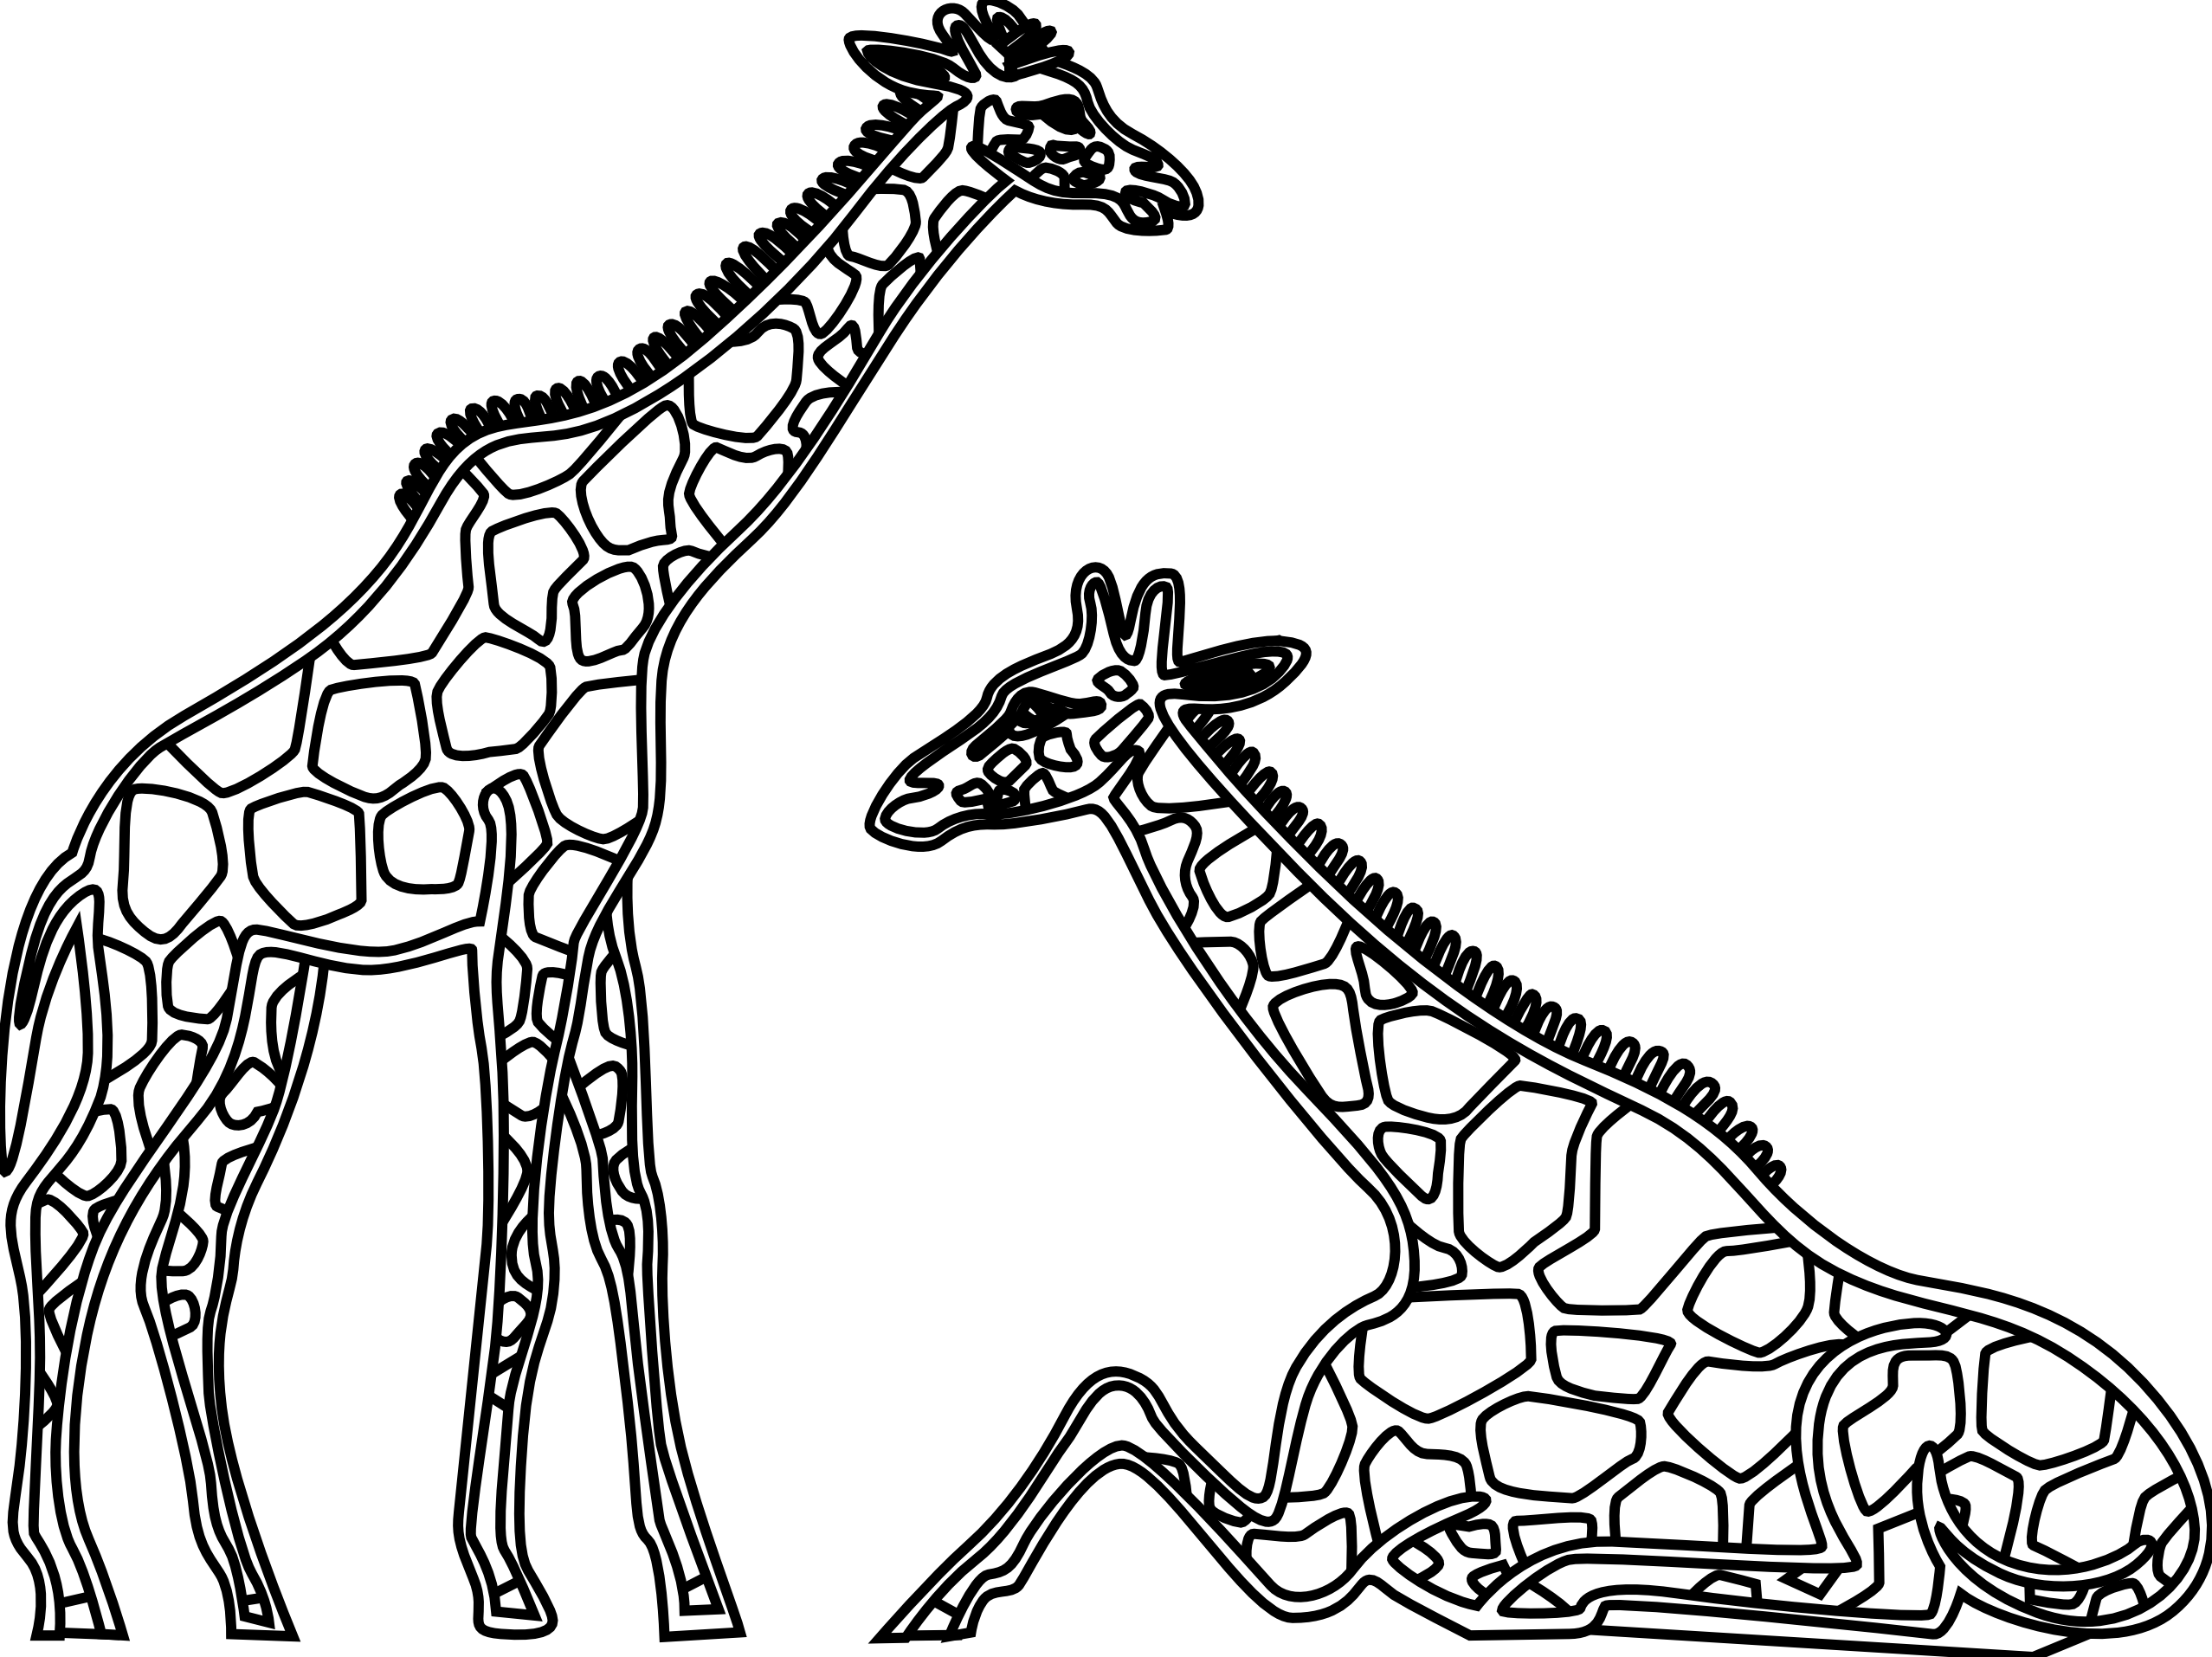 Giraffe Clipart Black And White   Clipart Panda   Free Clipart Images